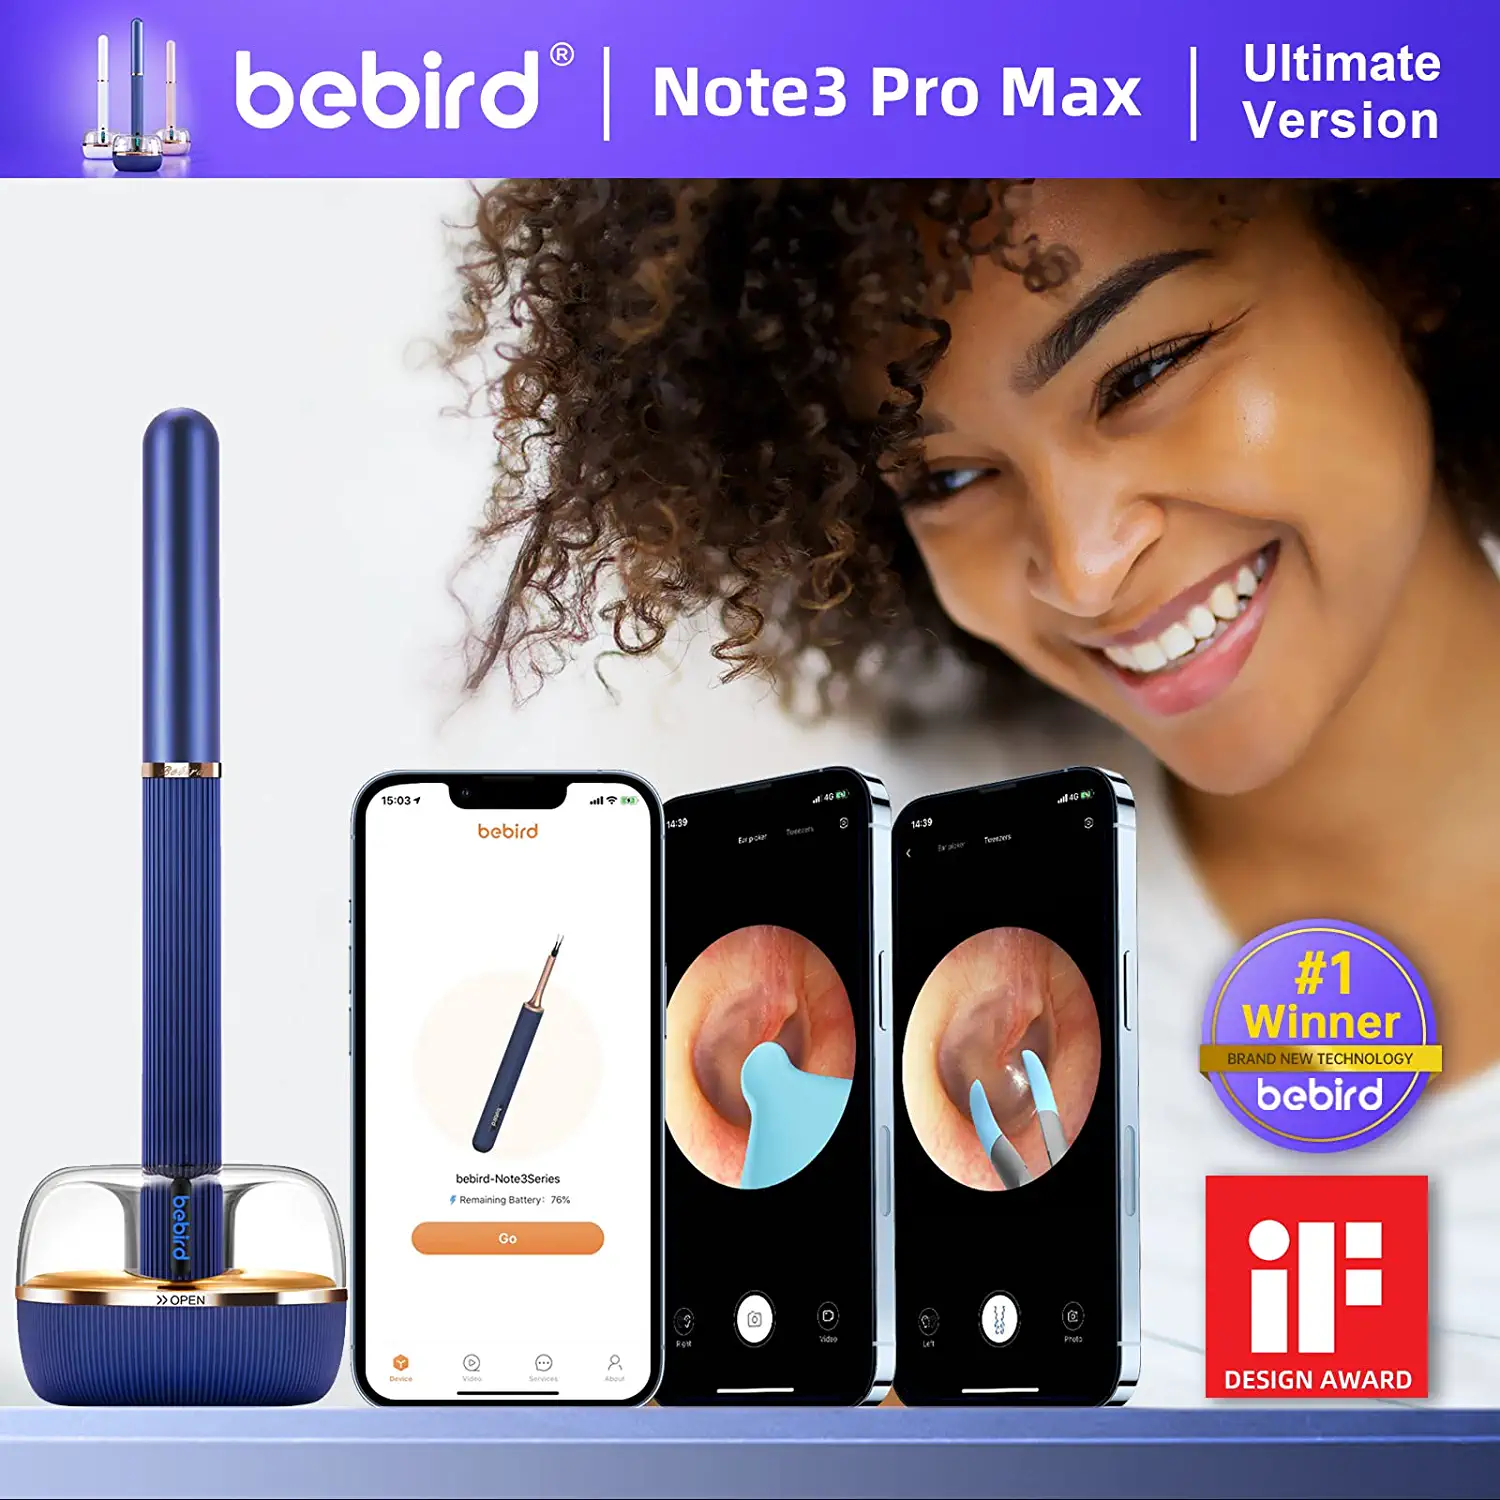 BEBIRD® Note3 Pro Max, Ultimate Version,10 Megapixel HD, All-in-1 Ear Wax Removal with Camera, Ear Wax Removal Tool with 25 Pieces, Tweezer and Rod, Bebird Ear Cleaner, for iPhone, Android (Blue)